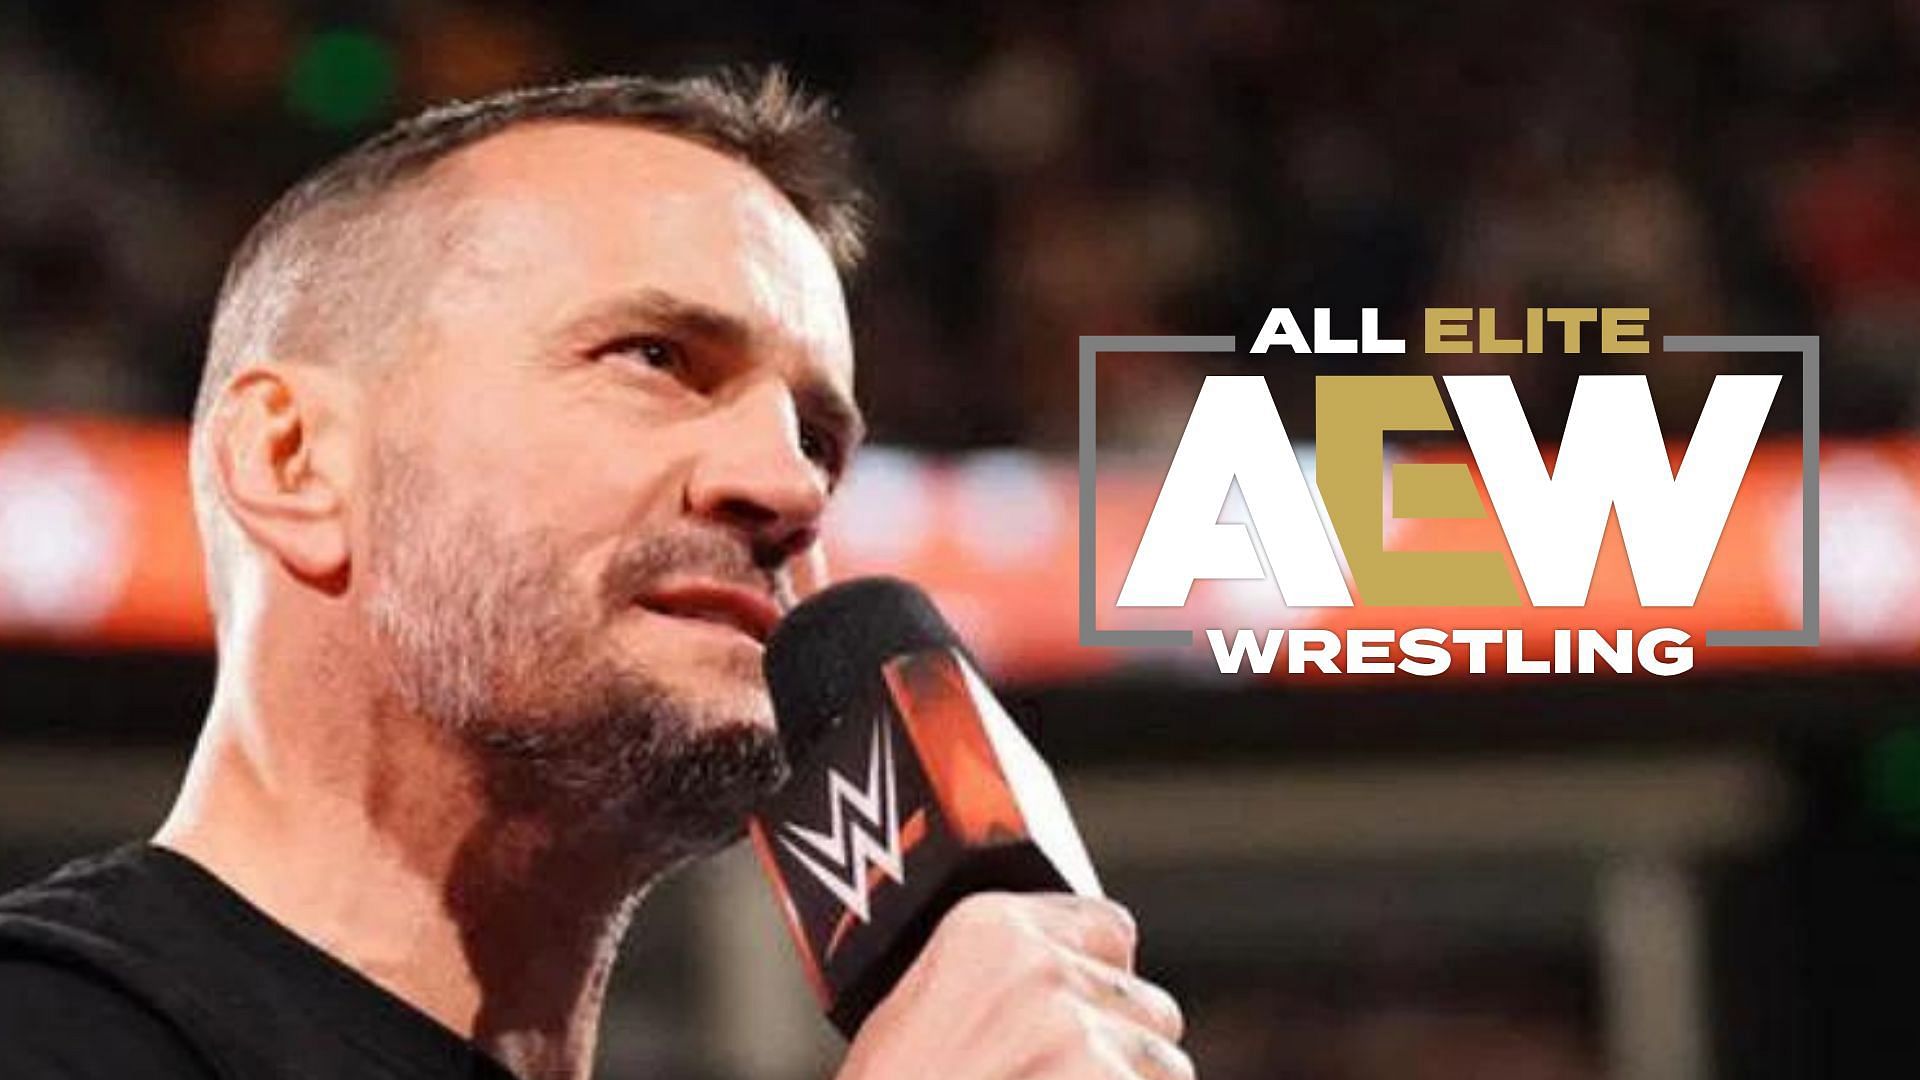 A former AEW star has reacted to a CM Punk botch